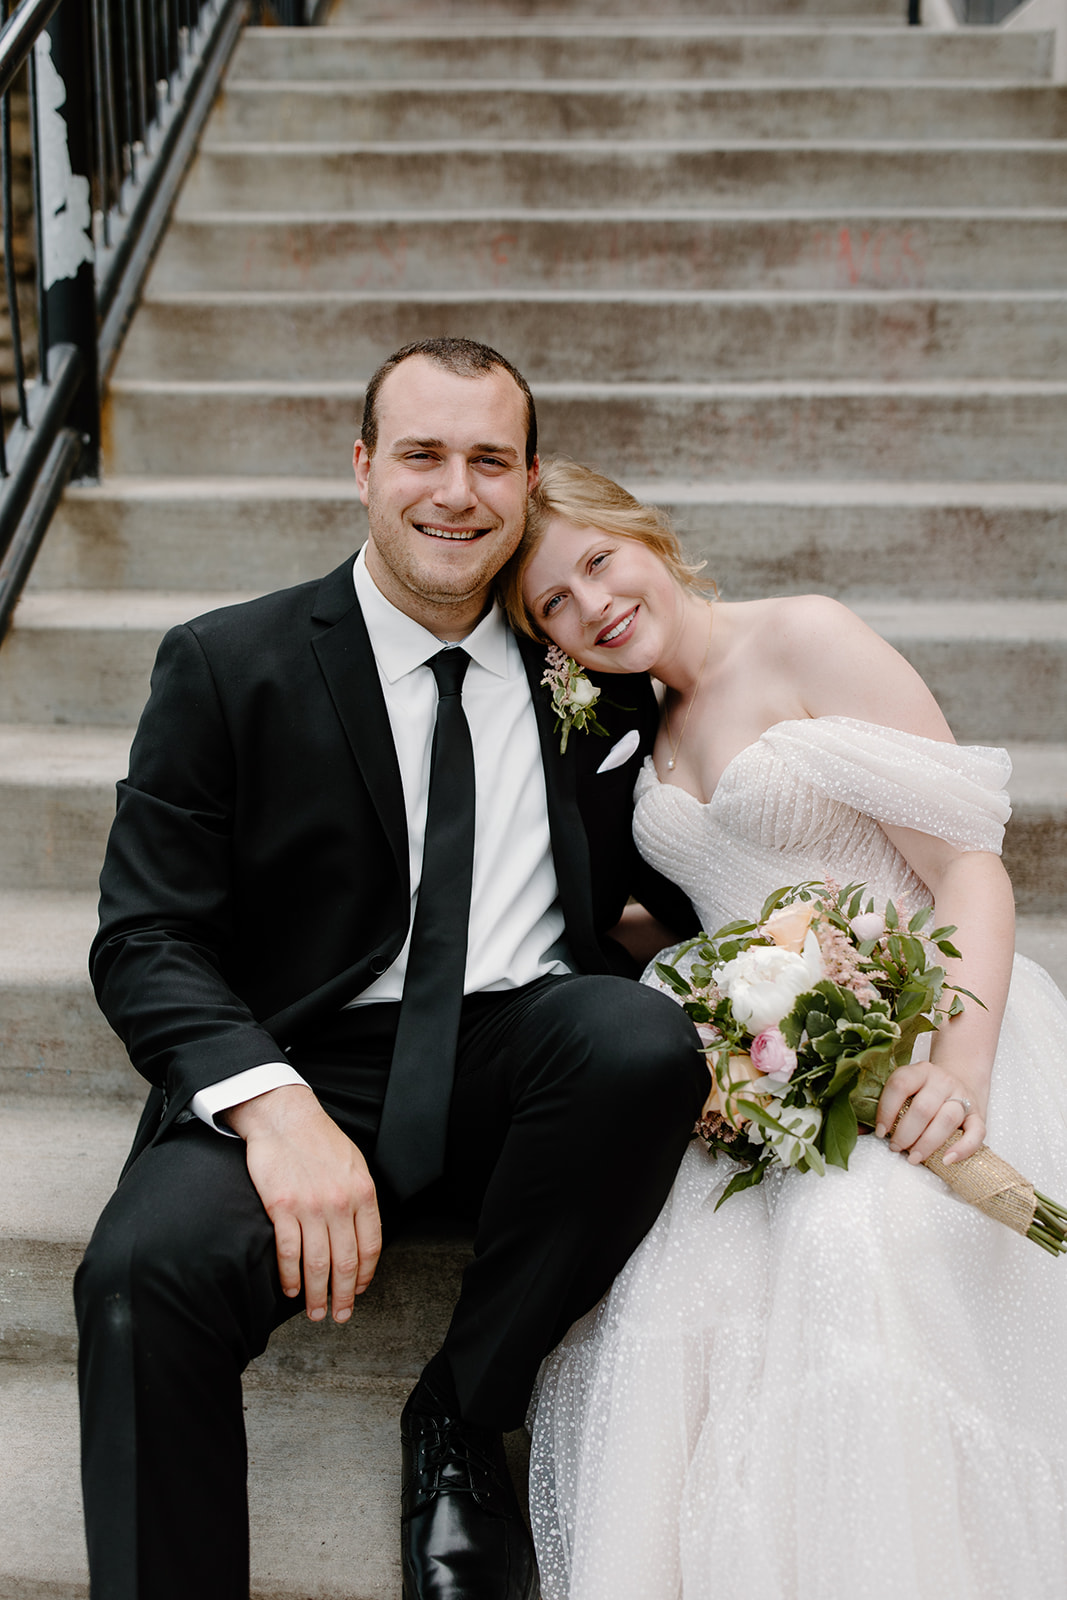 Bride and groom sitting on a staircase smiling at the camera